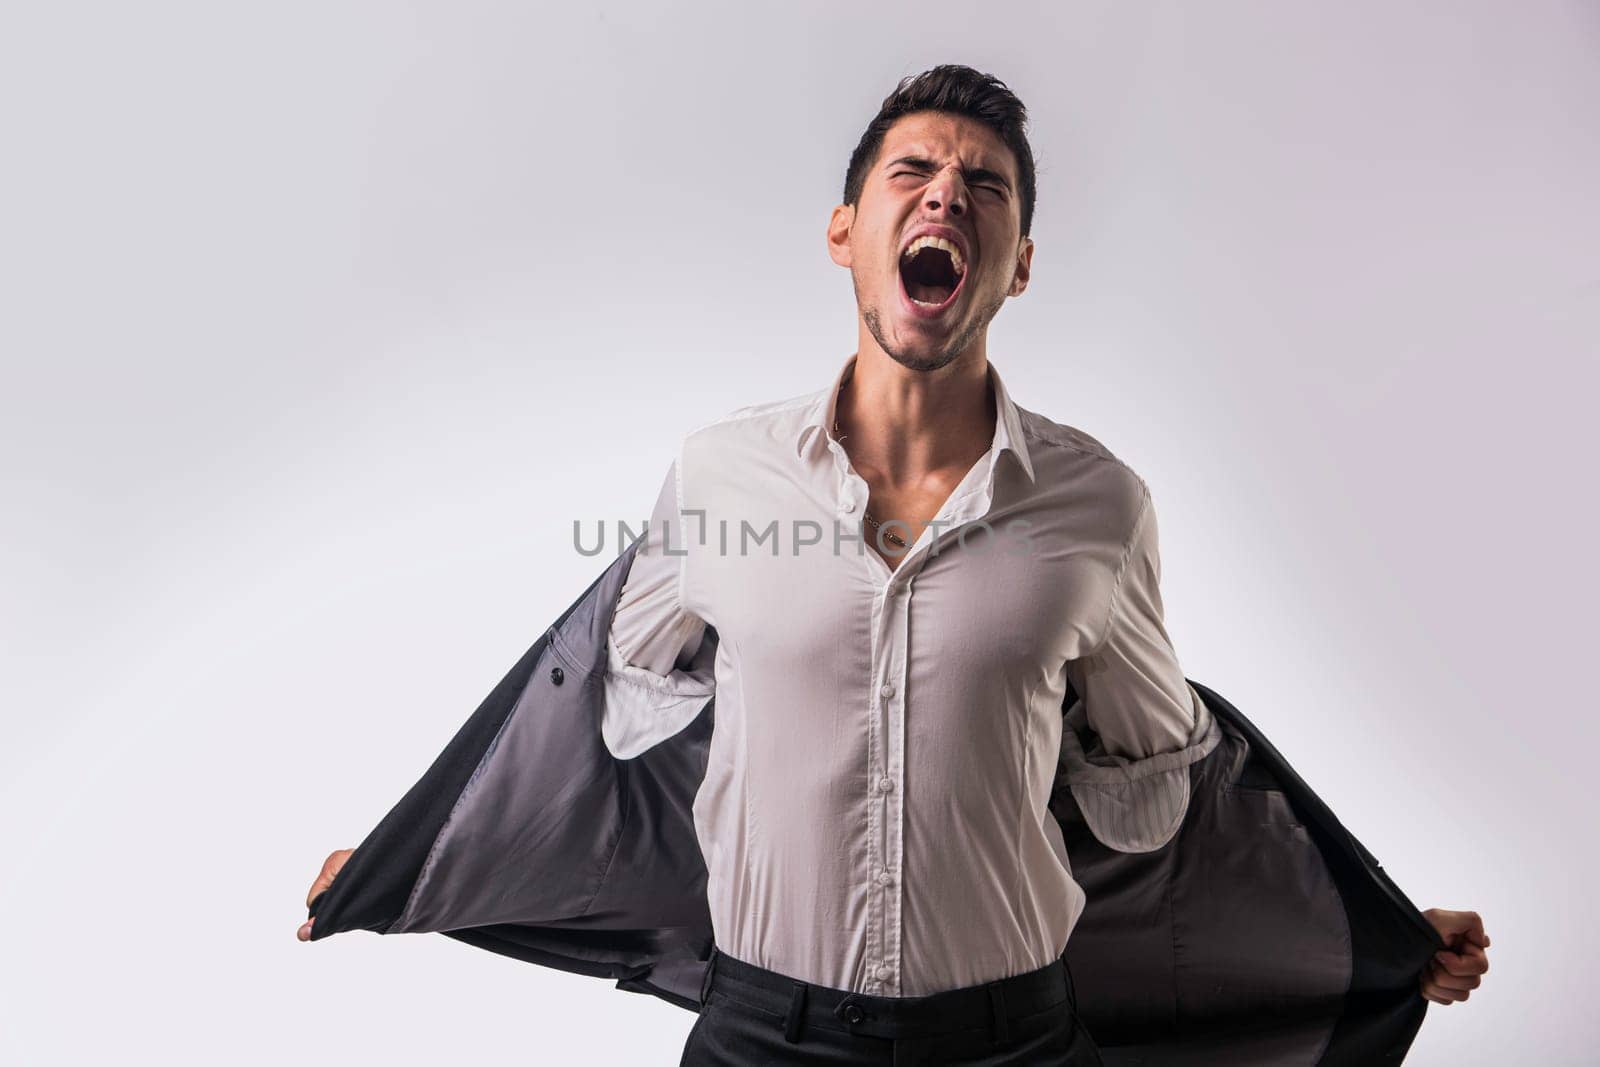 A man in a white shirt and black pants screaming with anger or frustration or desperation